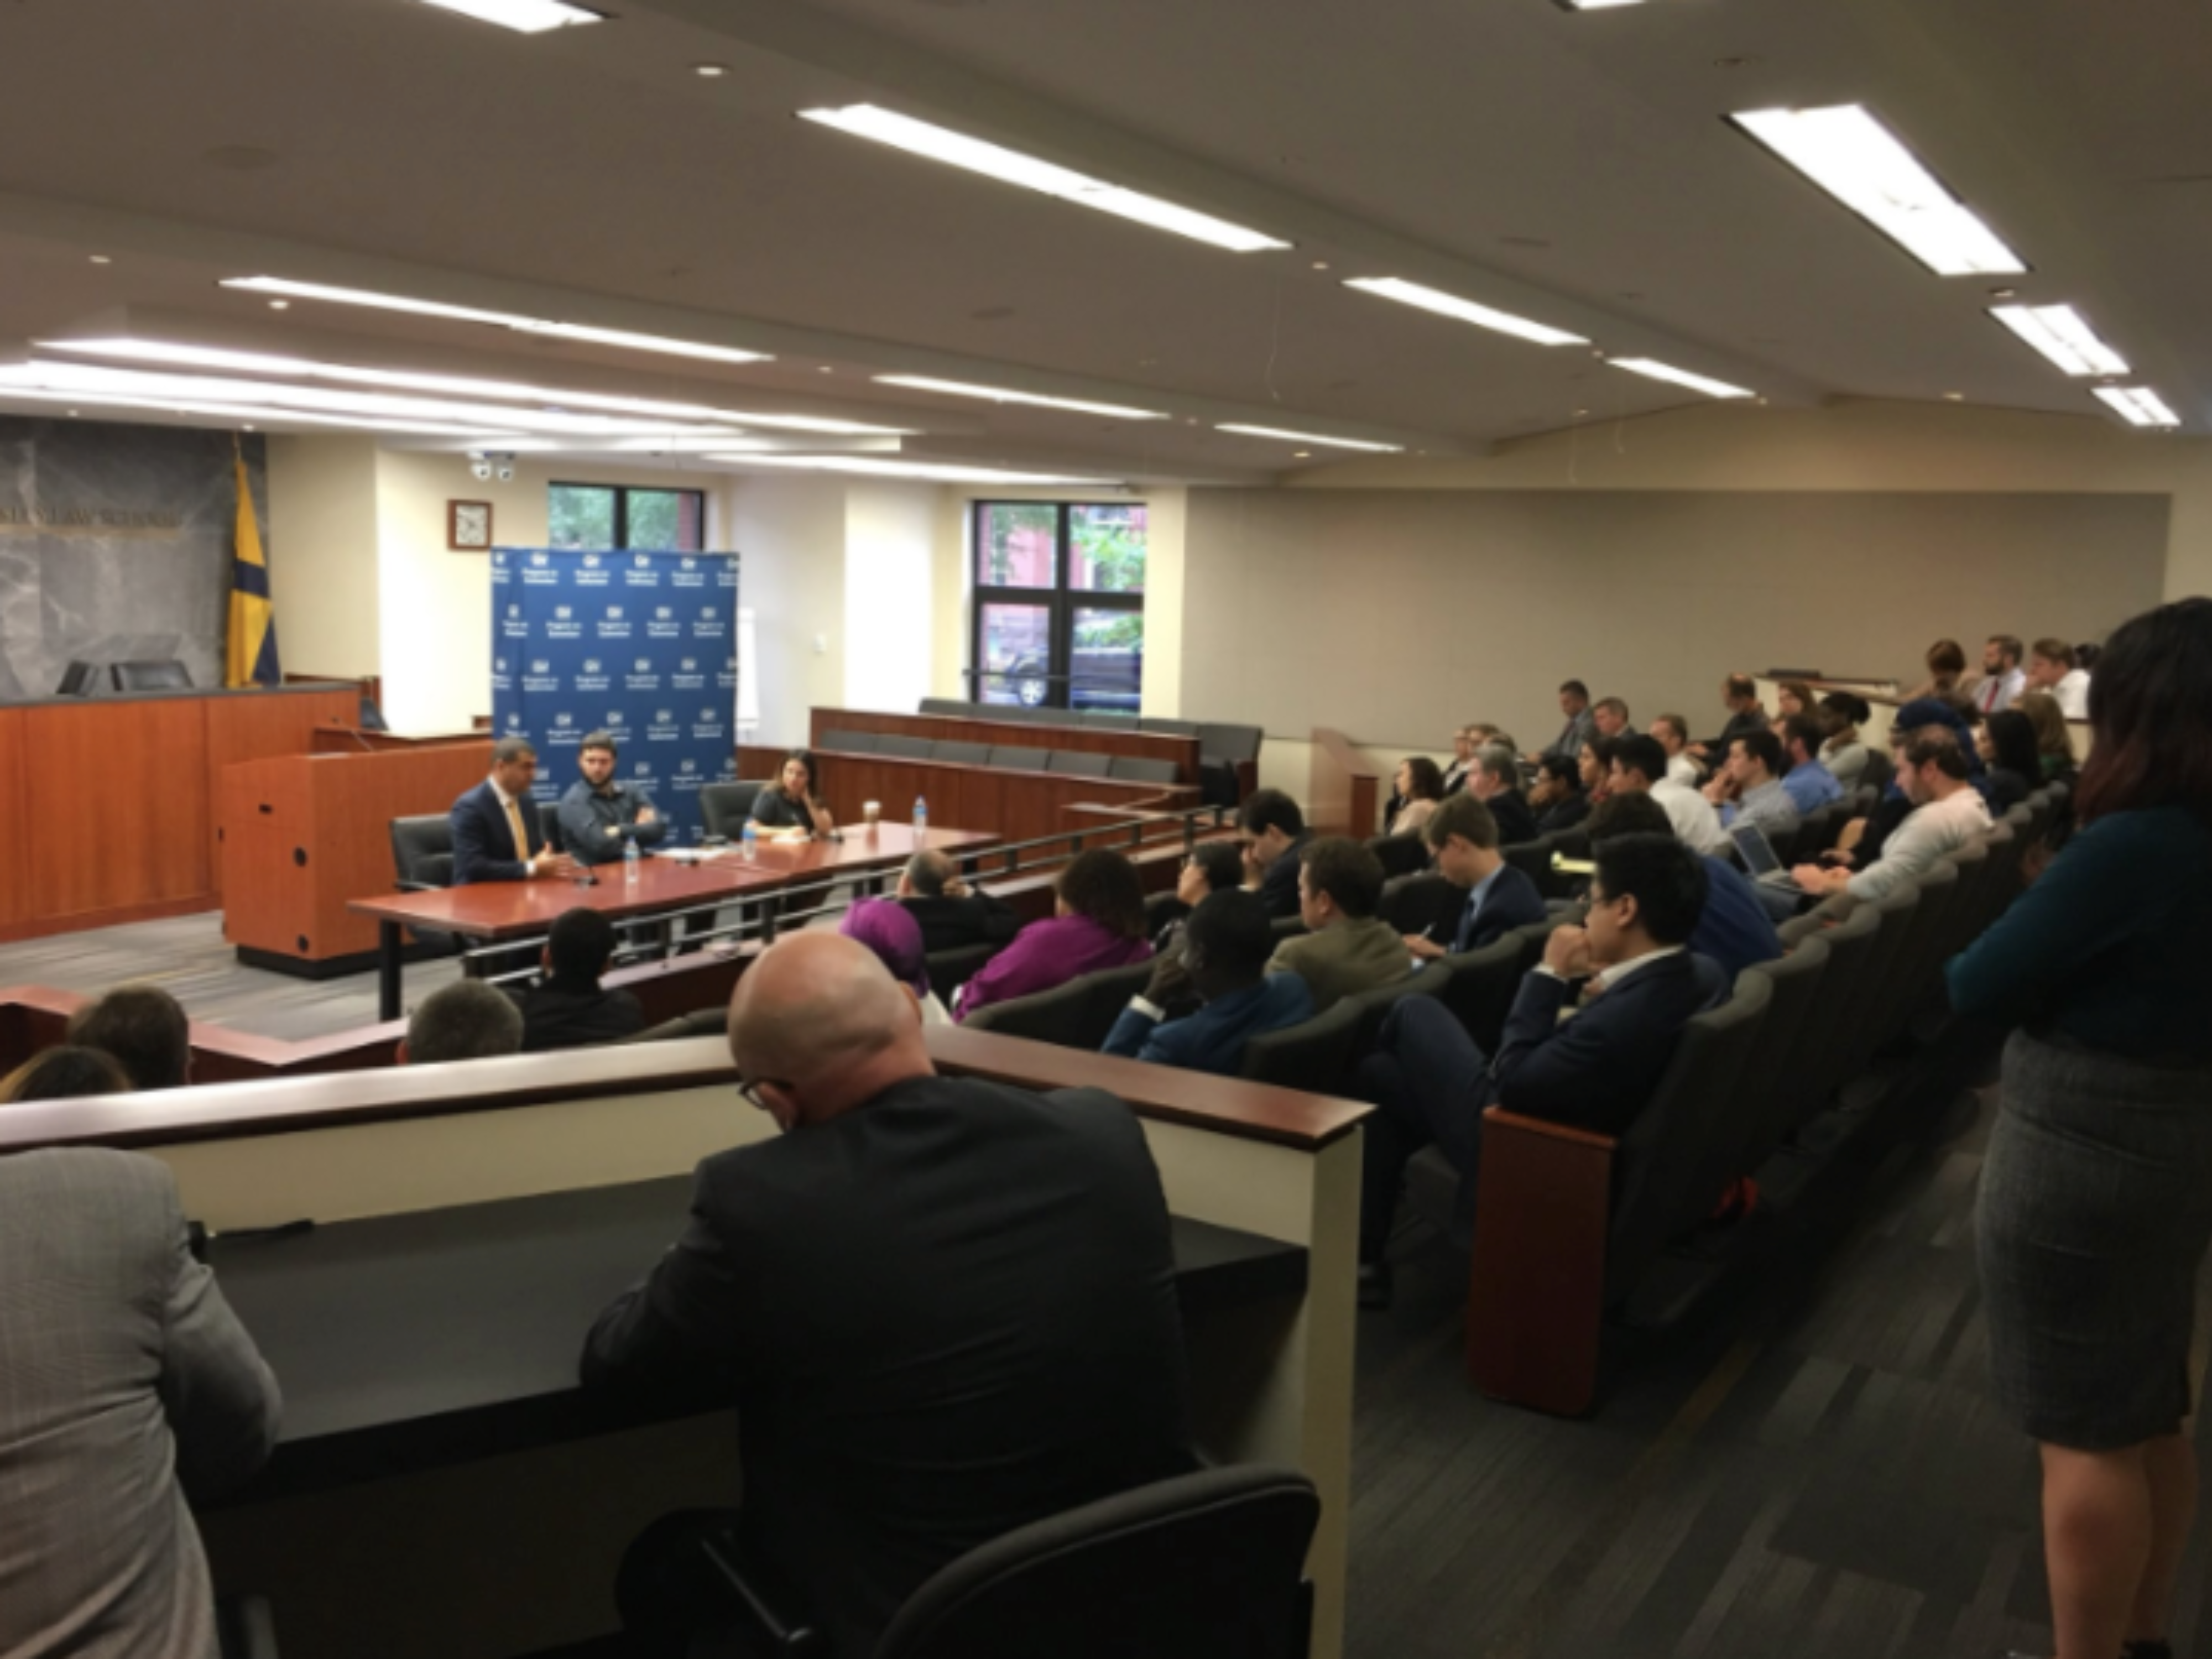 An image of the audience and speakers at the Iraq and Syria after the Caliphate: The Future of the Islamic State (IS) panel.